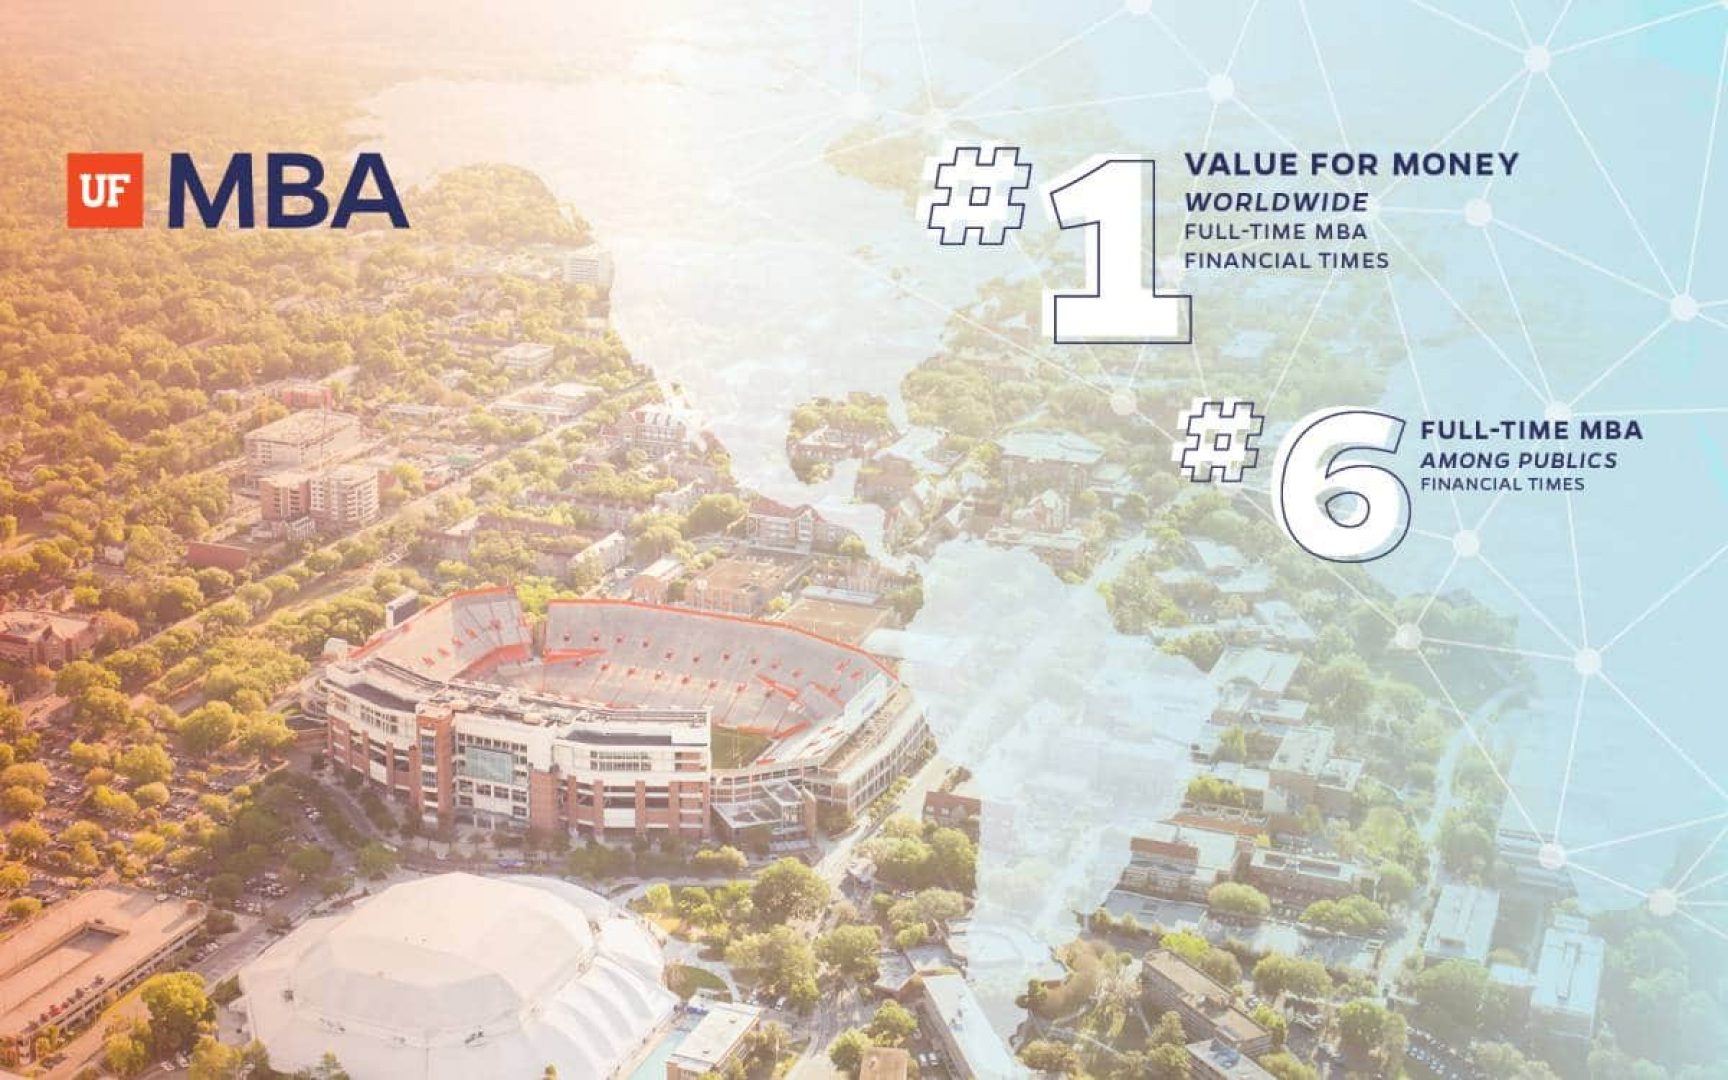 UF MBA ascends 19 spots on Financial Times’ Global MBA Rankings